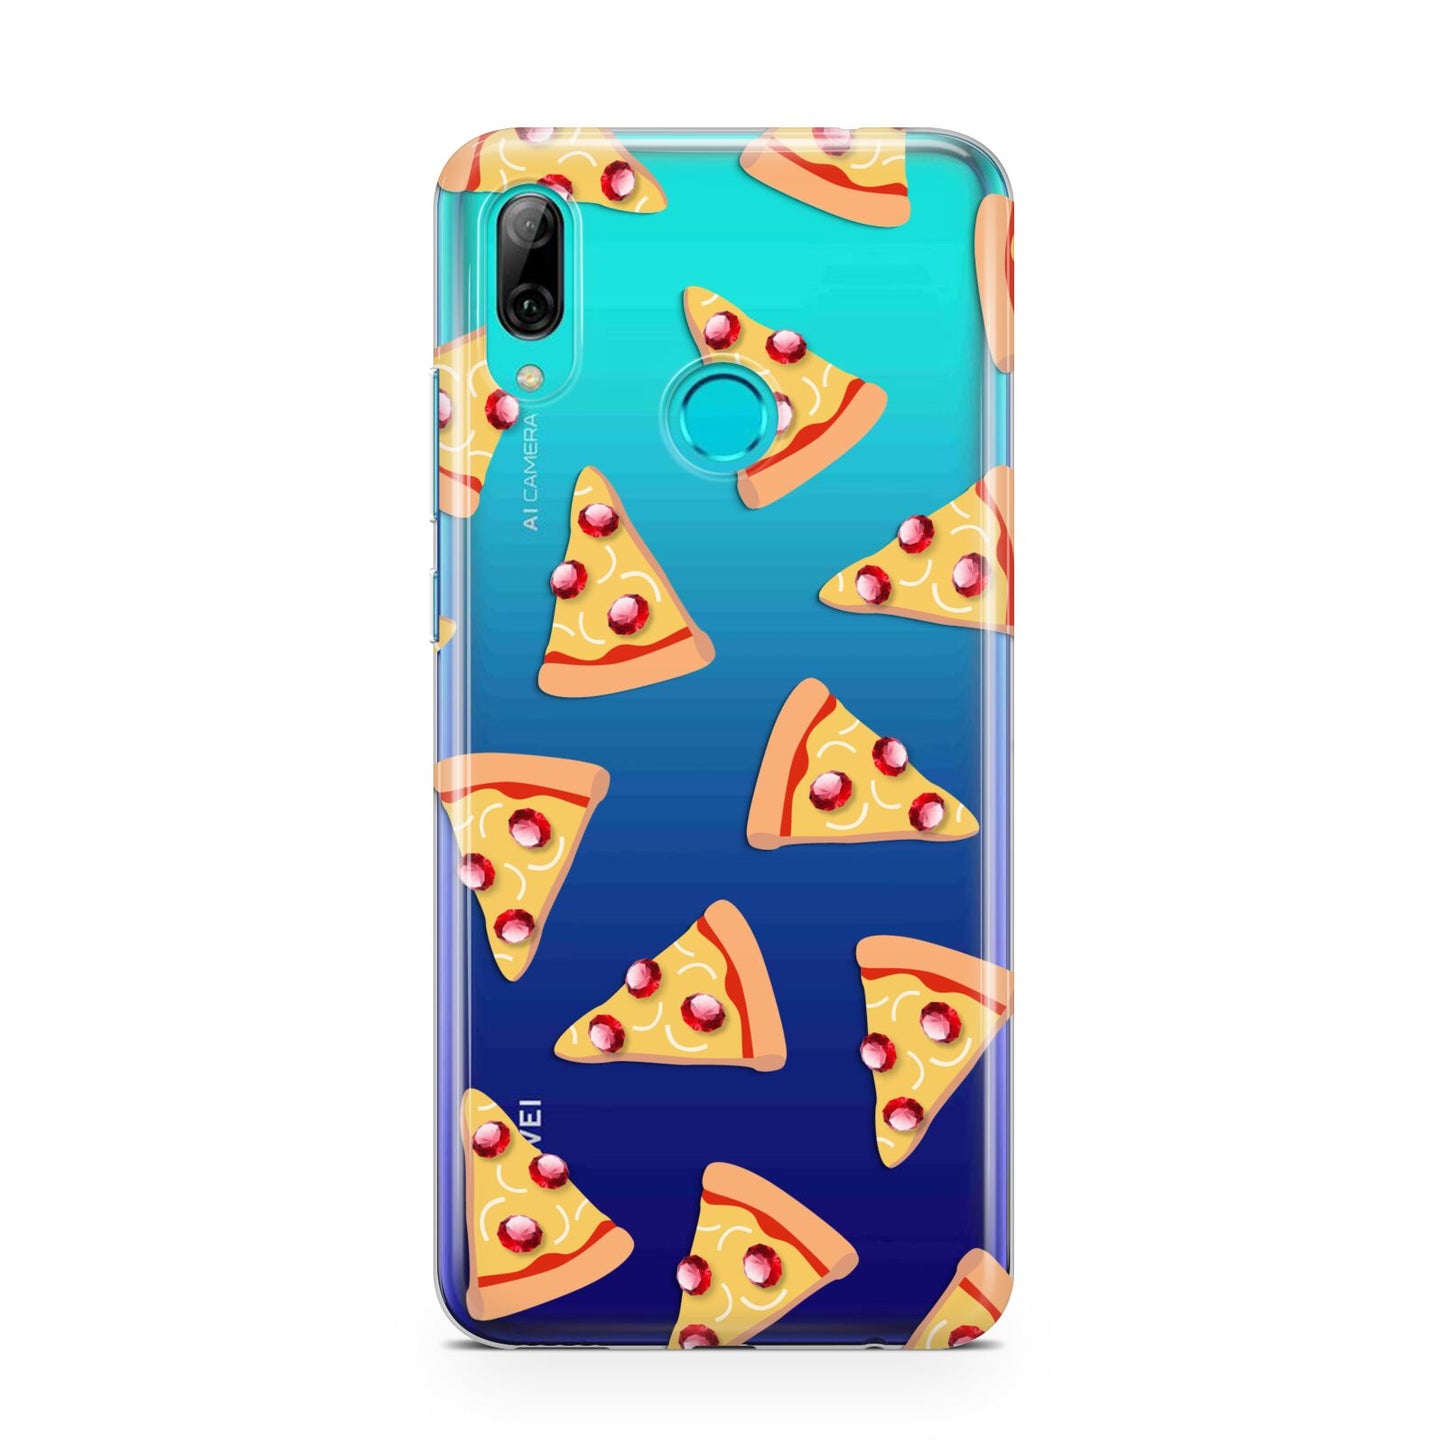 Rubies on Cartoon Pizza Slices Huawei P Smart 2019 Case